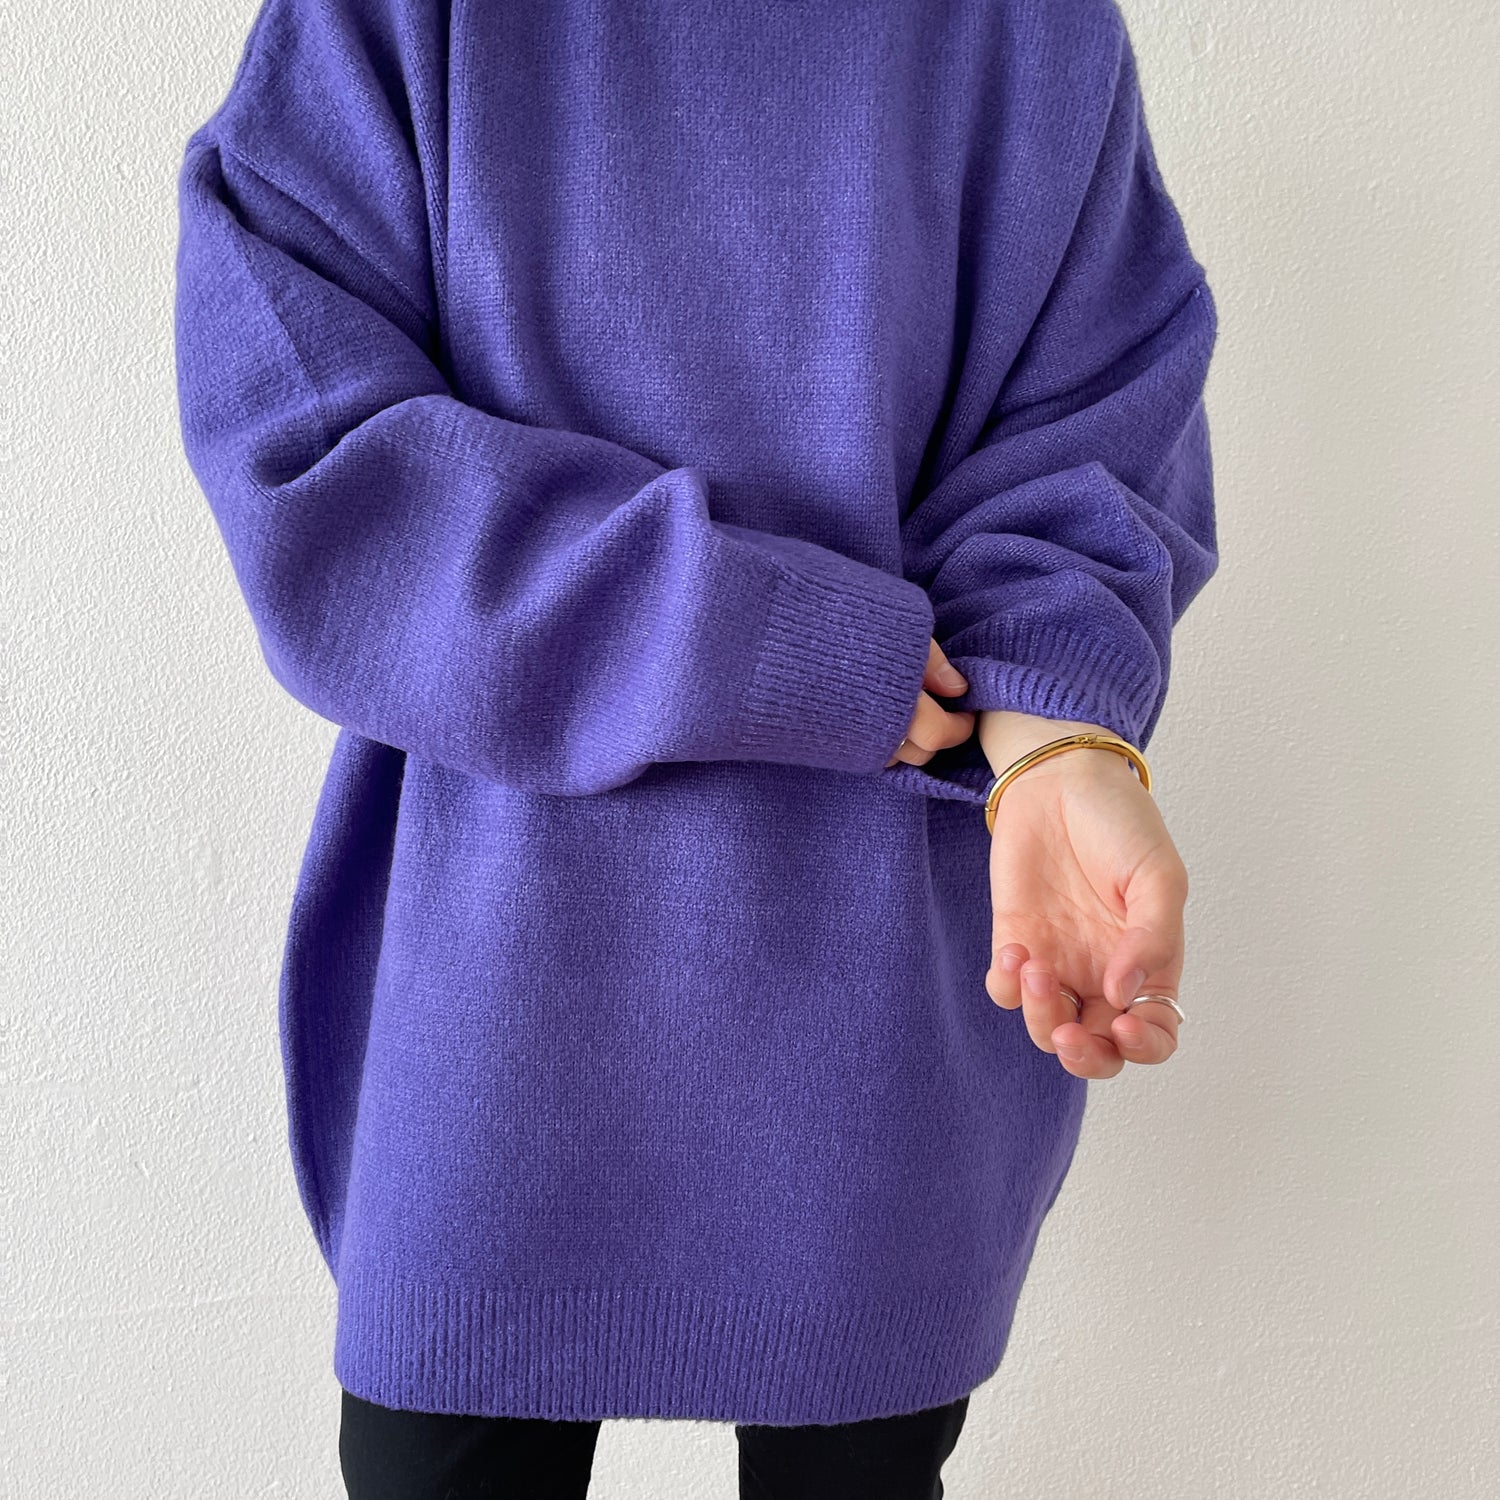 over size loose knit / purple